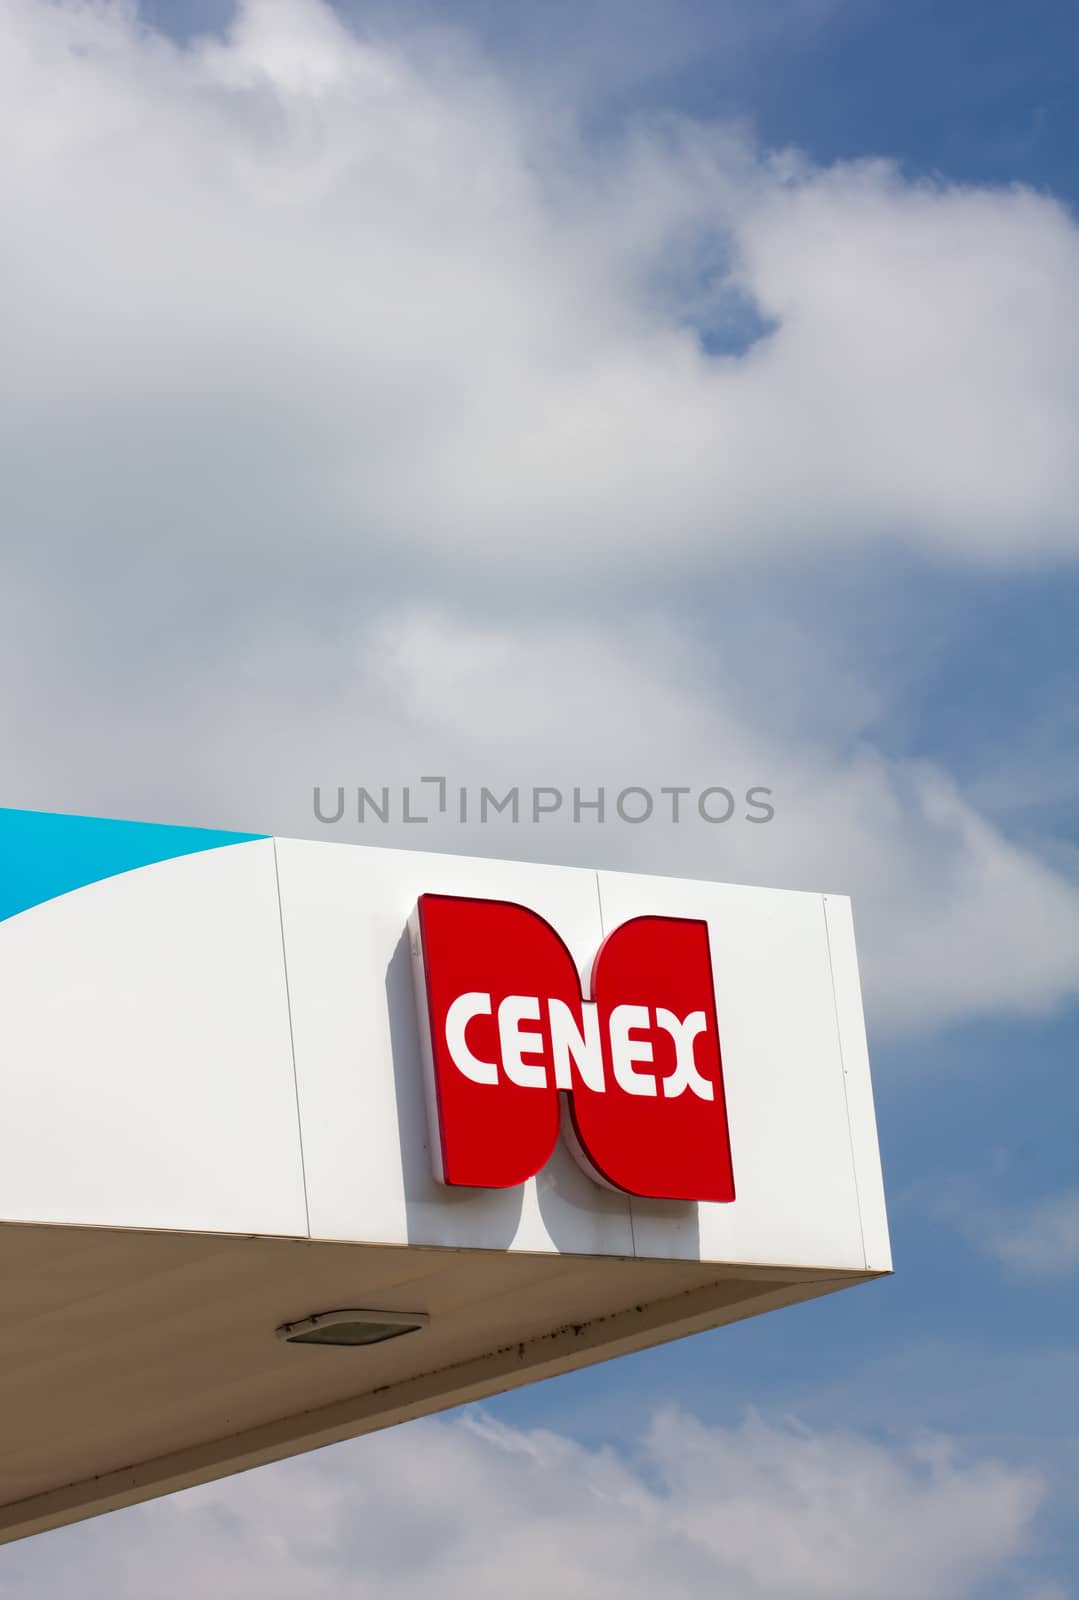 LAKE DELTON, WI/USA - JUNE 26, 2014: Cenex gas station exterior. Cenex is owned by agricultural cooperatives, farmers, ranchers, and stock holders with headquarters in Minnesota.